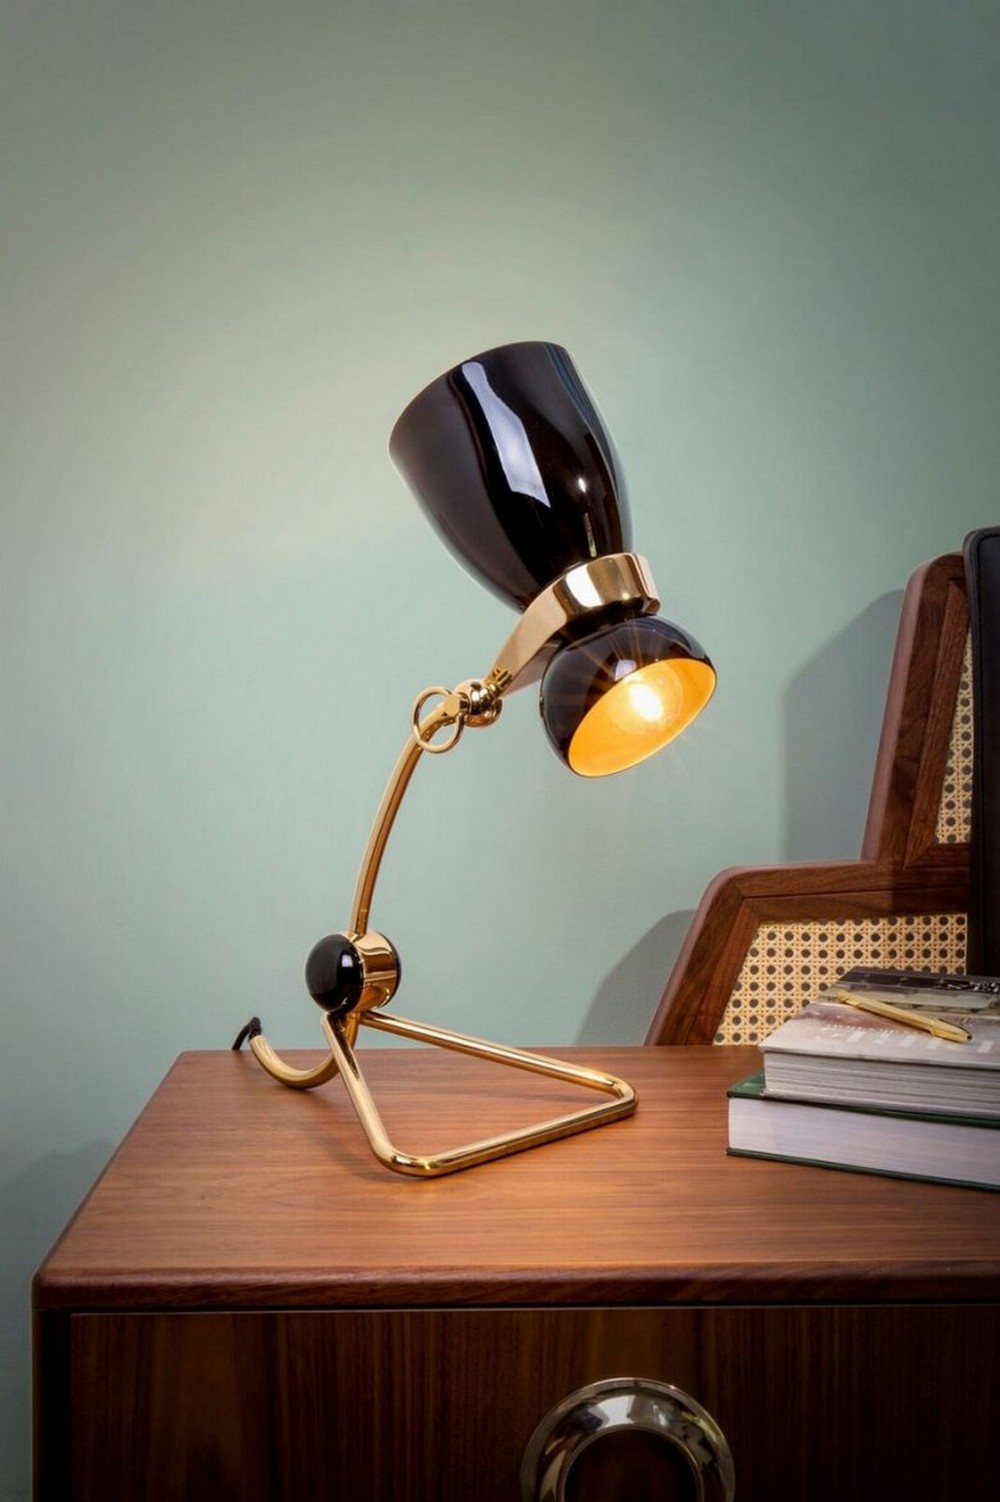 Light Up Your Holiday Decor With These Mid-Century Lighting Designs